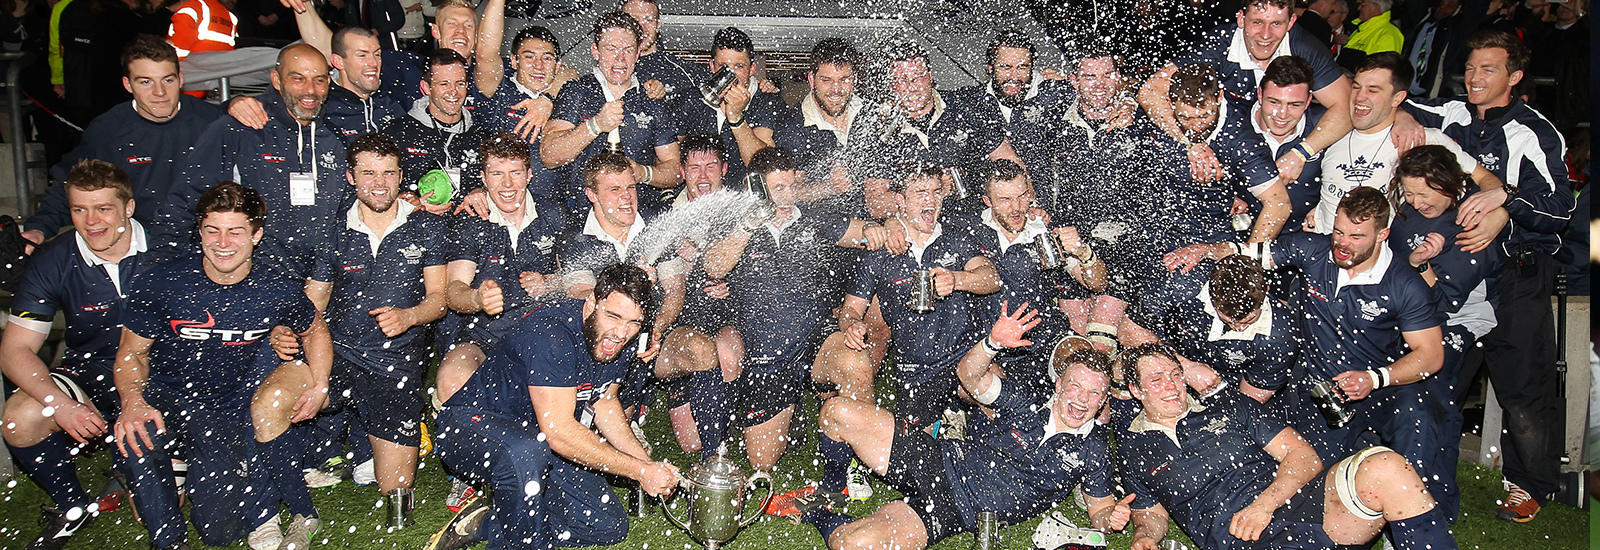 Oxford men post sixth consecutive win on historic day for Varsity rugby